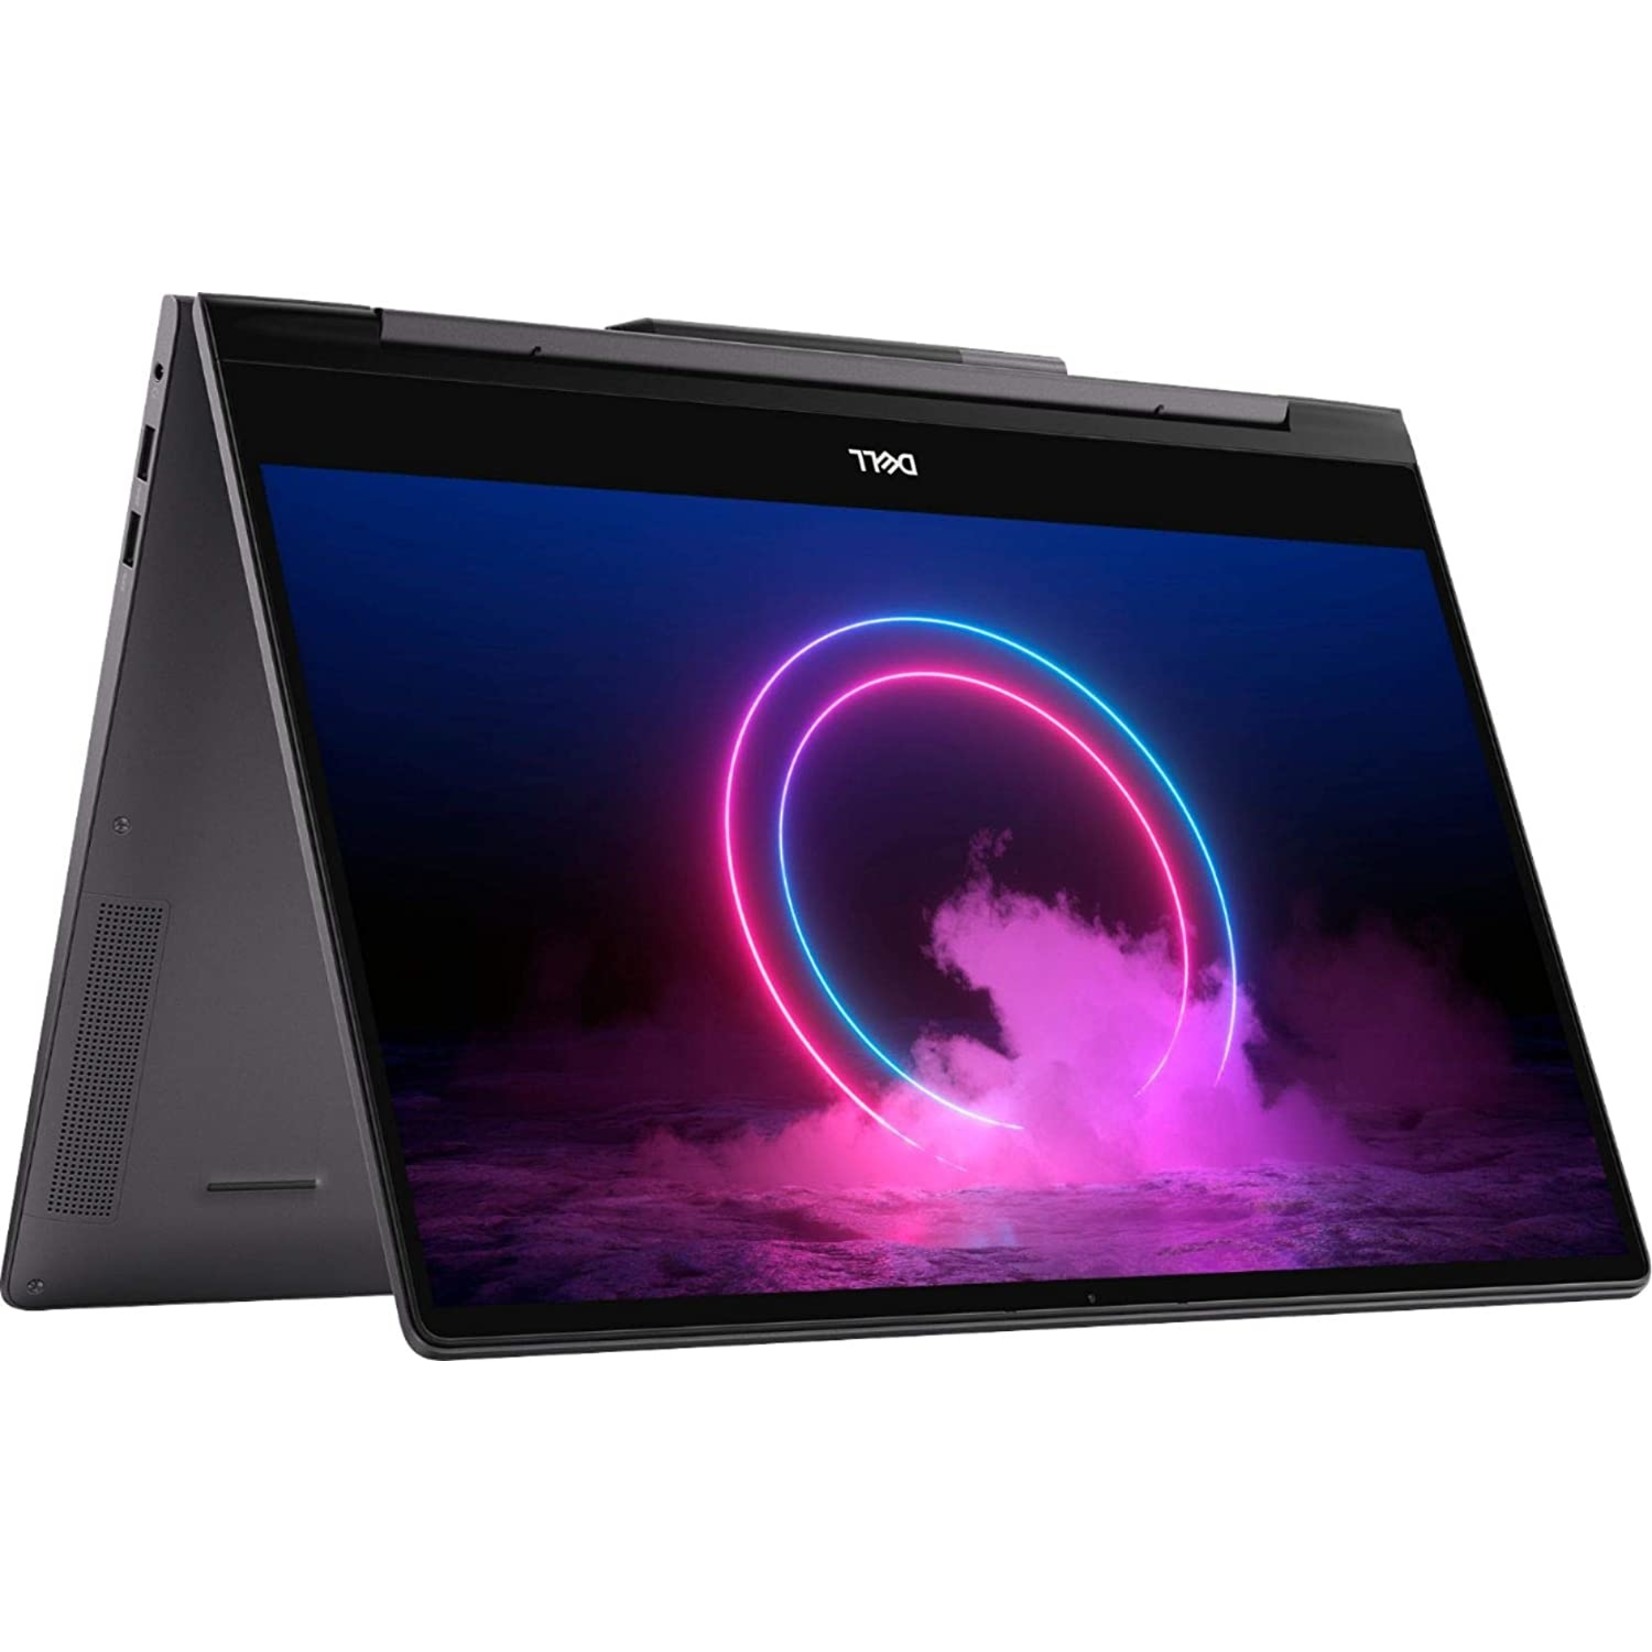 OPEN BOX Dell Inspiron 15 7591 2-in-1 4K UHD Touch Display and Pen / i7 / 16GB RAM / 512GB SSD / NVIDIA MX 250